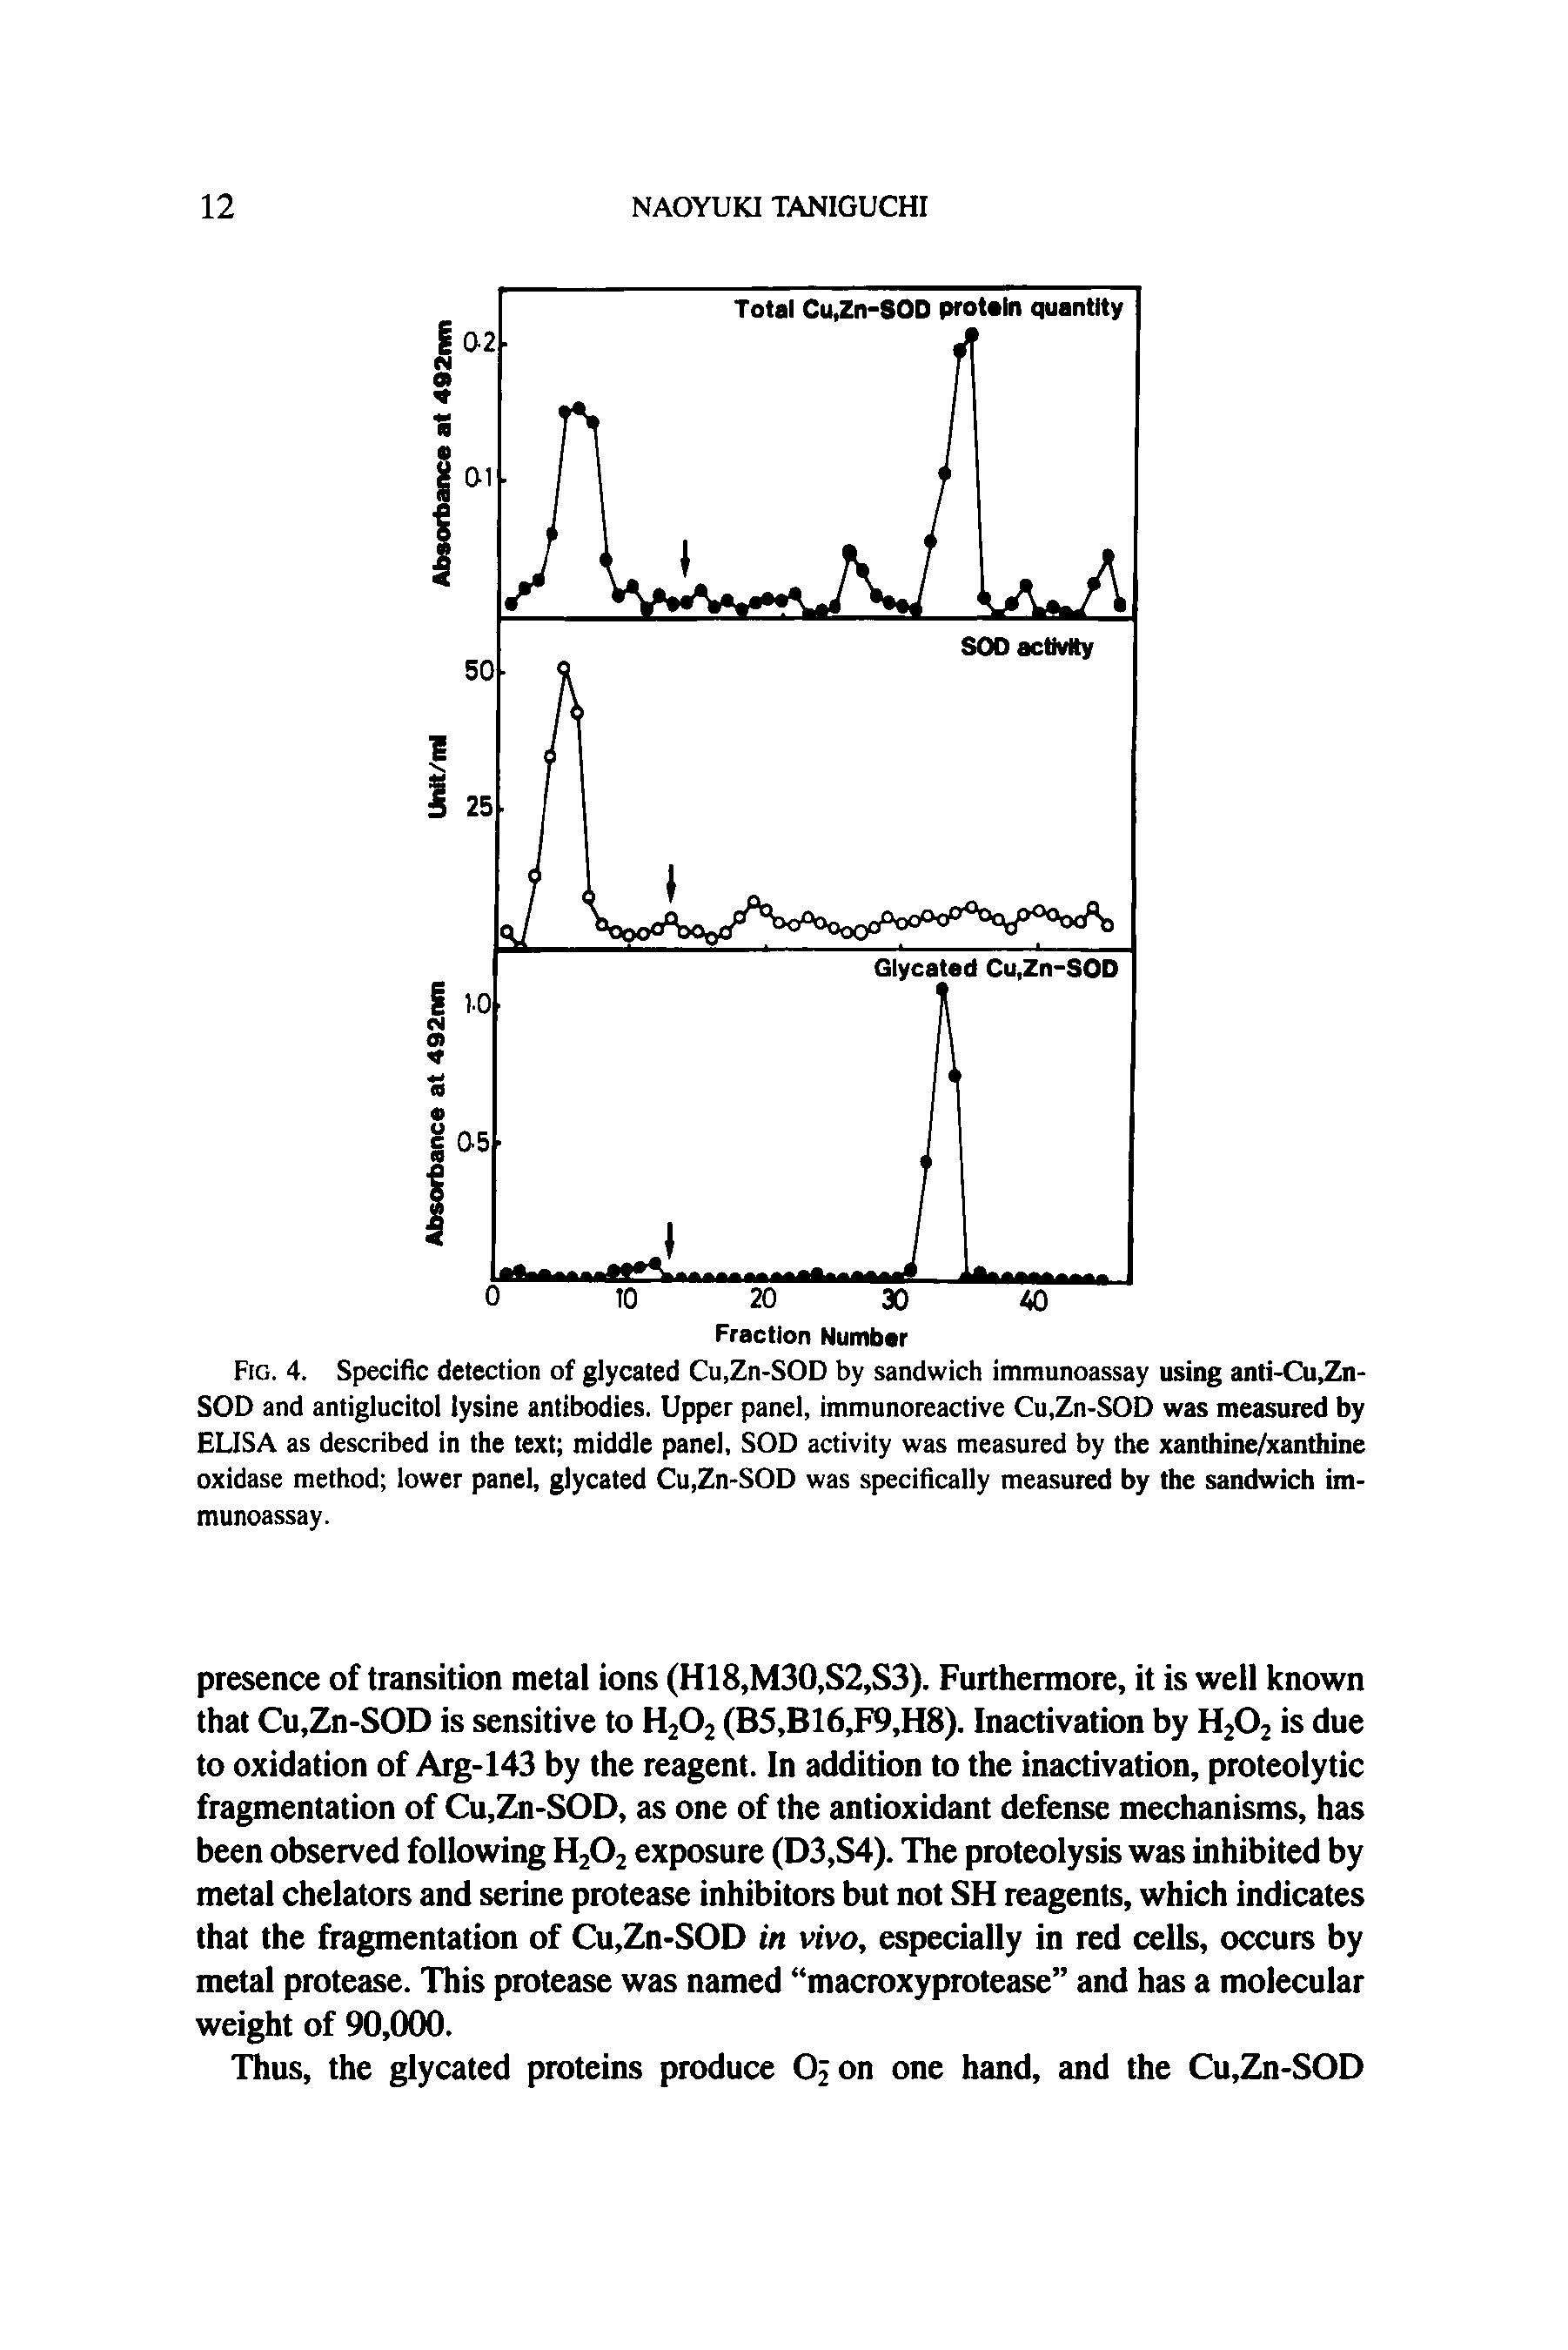 Fig. 4. Specific detection of glycated Cu,Zn-SOD by sandwich immunoassay using anti-Cu,Zn-SOD and antiglucitol lysine antibodies. Upper panel, immunoreactive Cu,Zn-SOD was measured by ELISA as described in the text middle panel, SOD activity was measured by the xanthine/xanthine oxidase method lower panel, glycated Cu,Zn-SOD was specifically measured by the sandwich immunoassay.